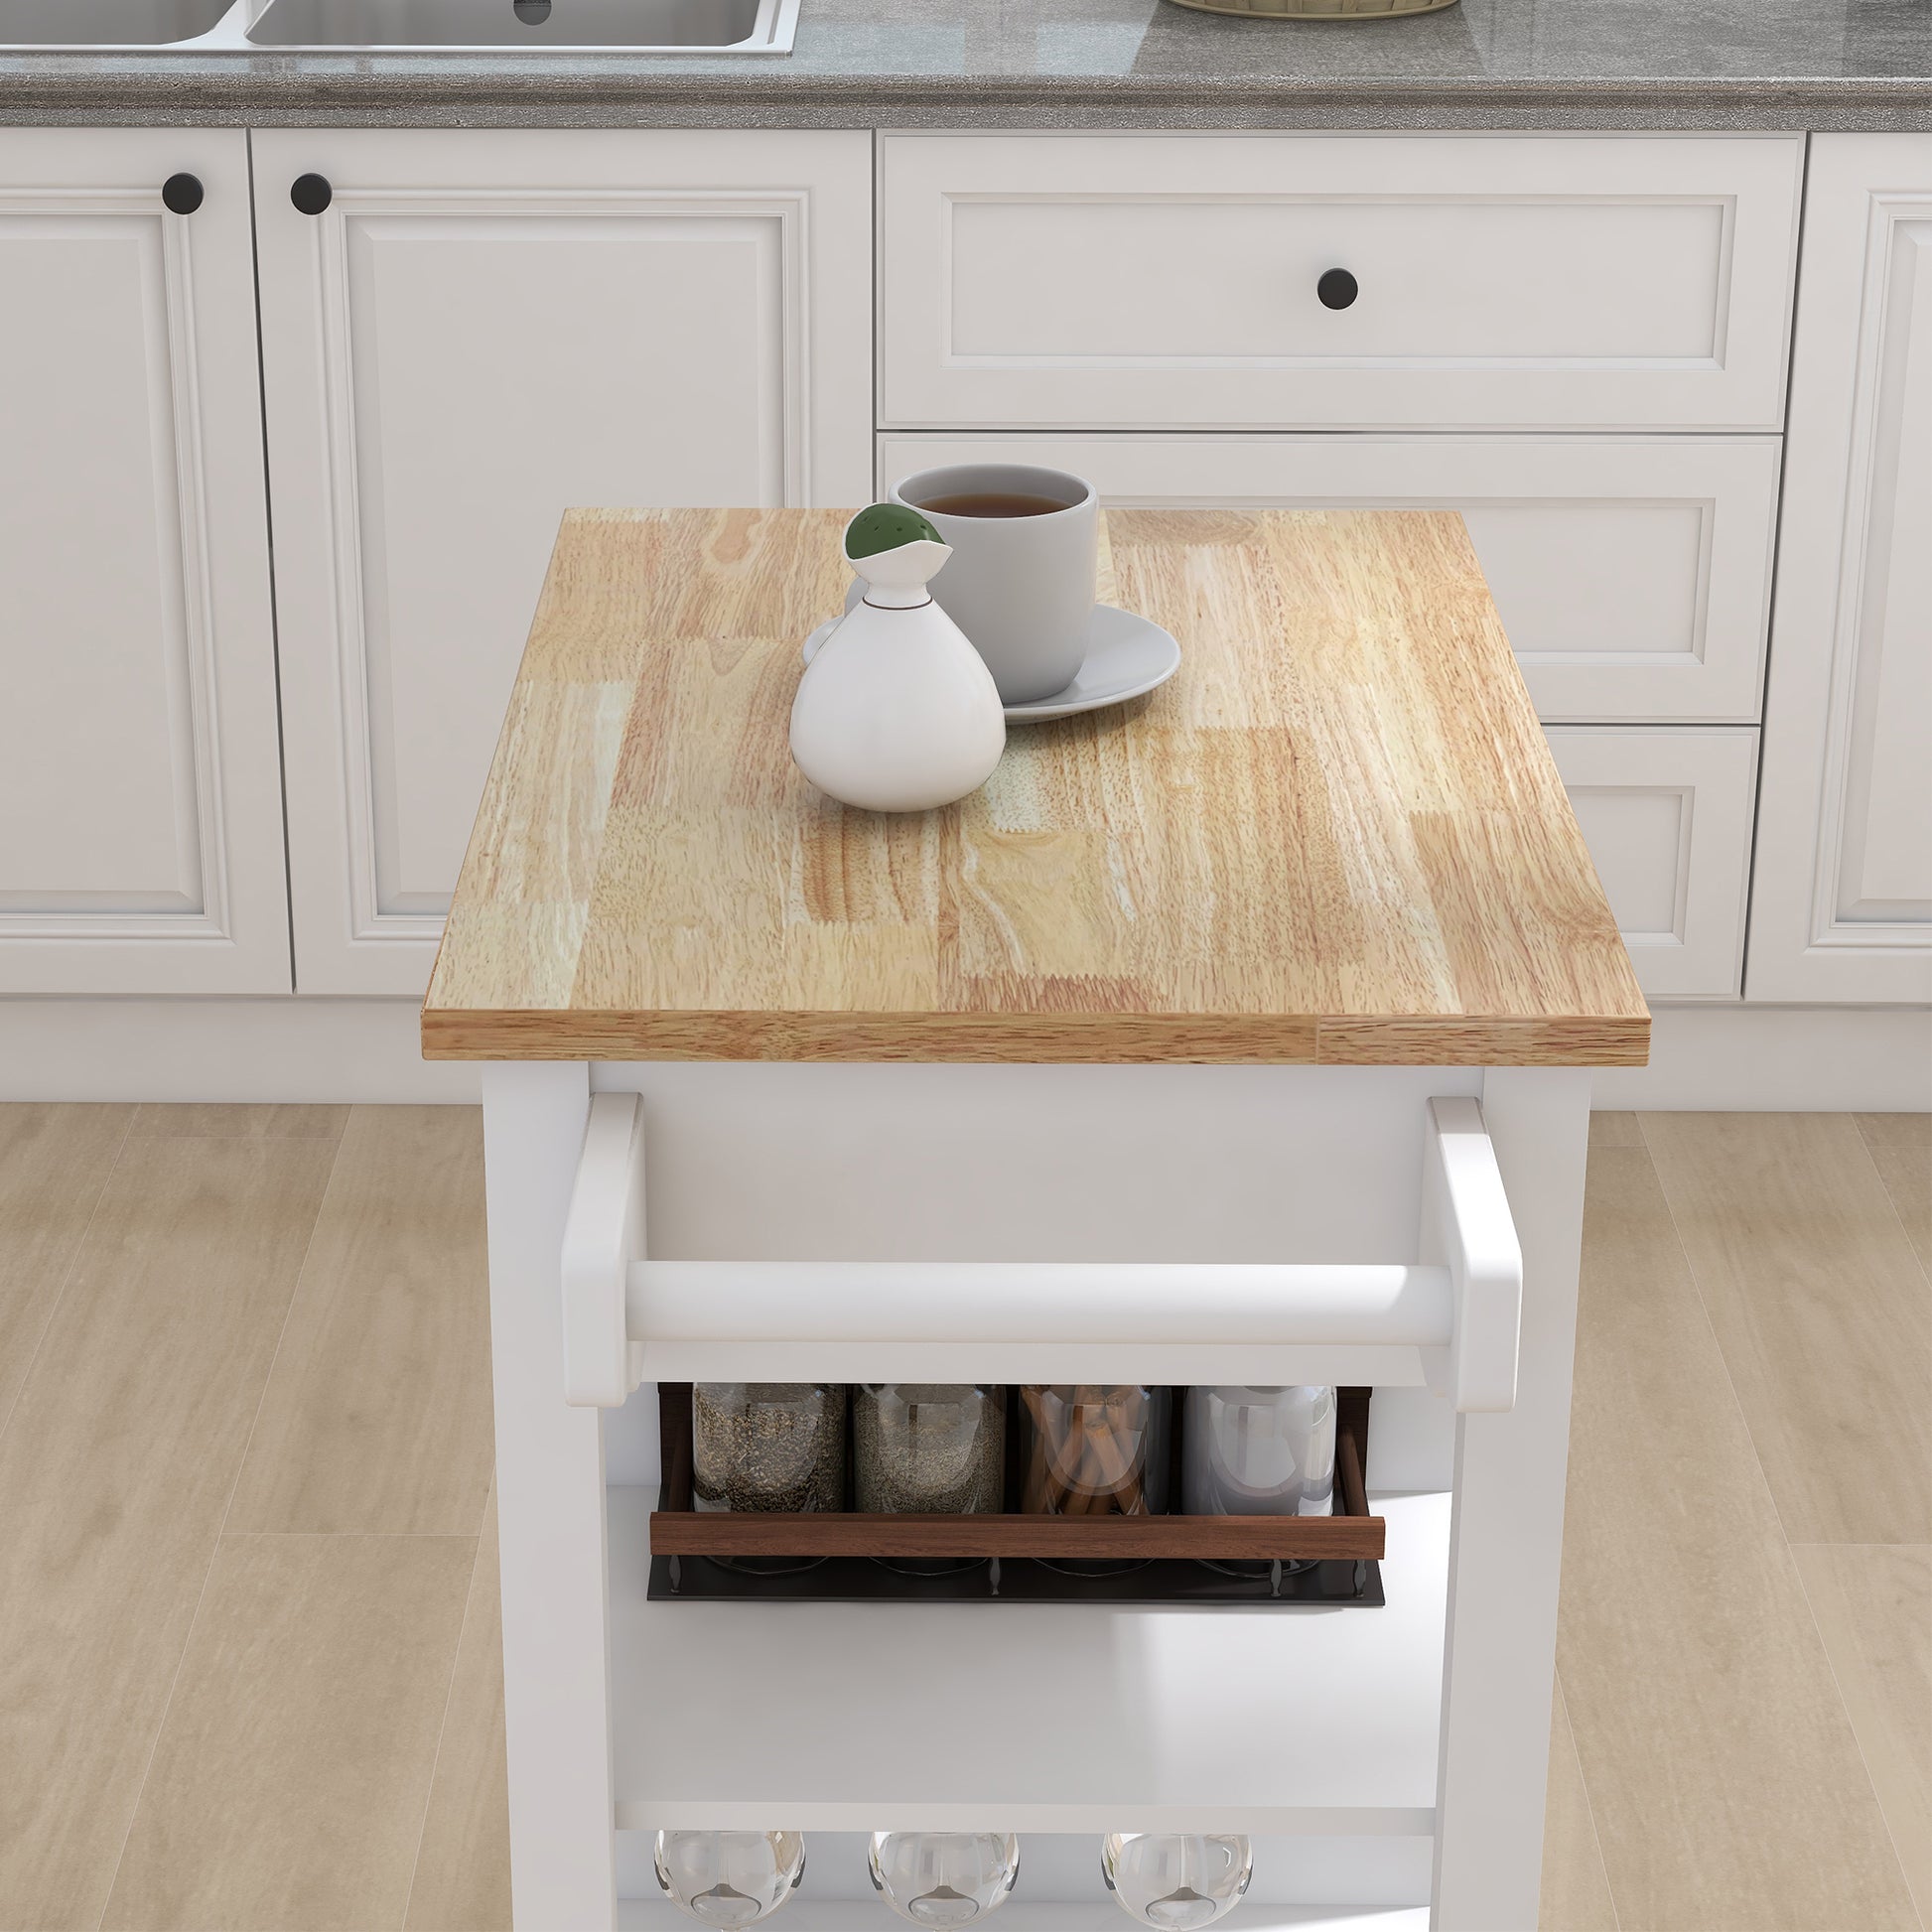 Kitchen Island with Casters in White